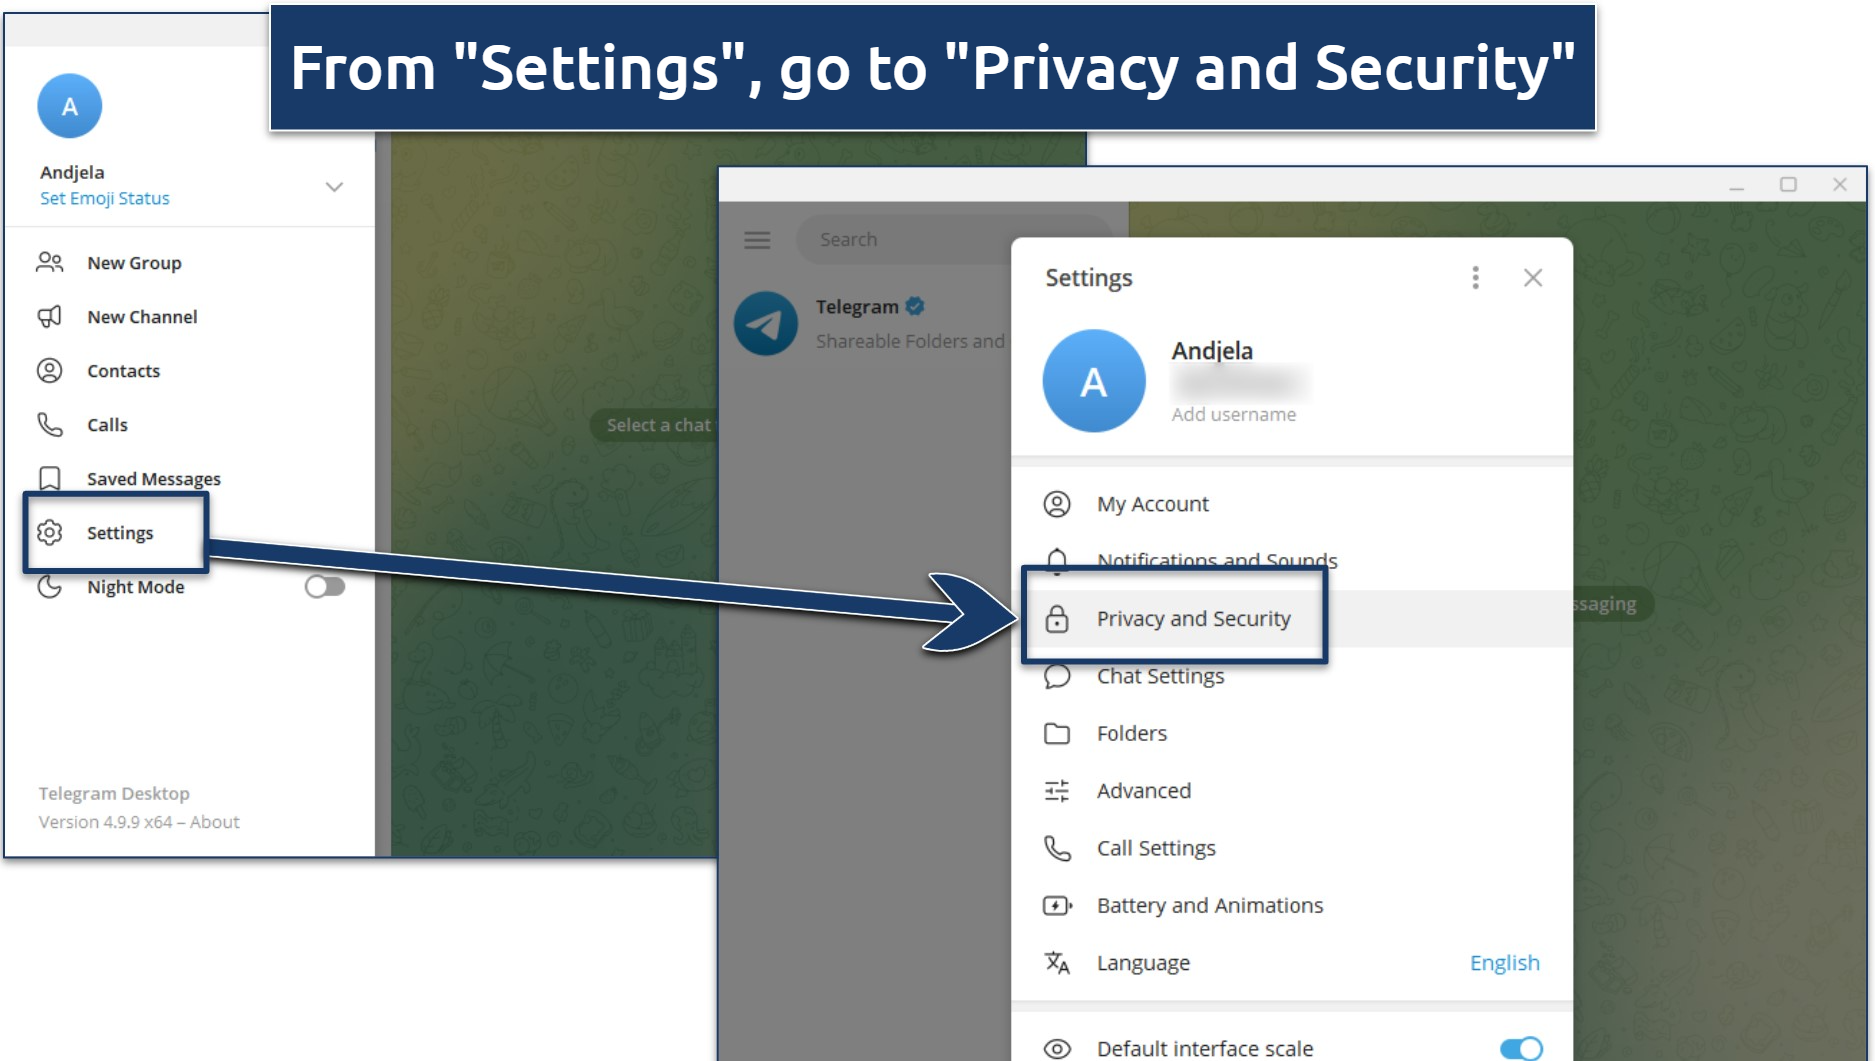 Instructions on how to find privacy and security settings on Telegram Desktop